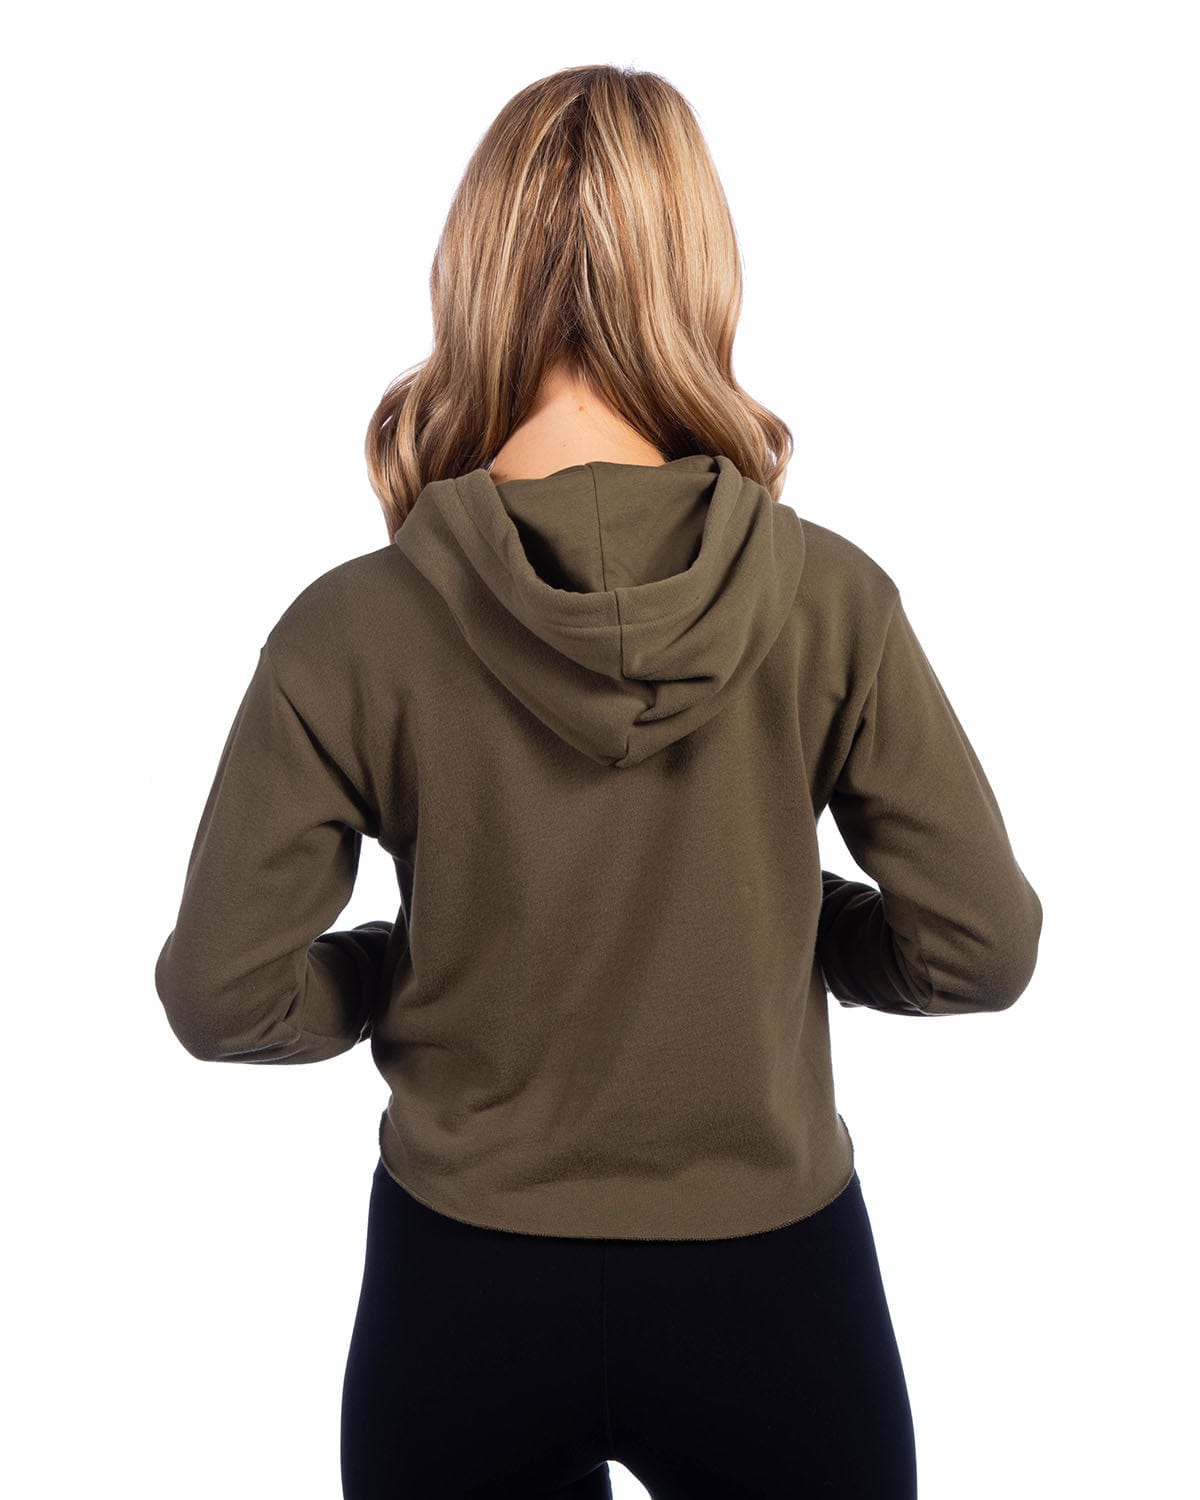 Next Level 9384 Ladies' Cropped Pullover Hooded Sweatshirt 